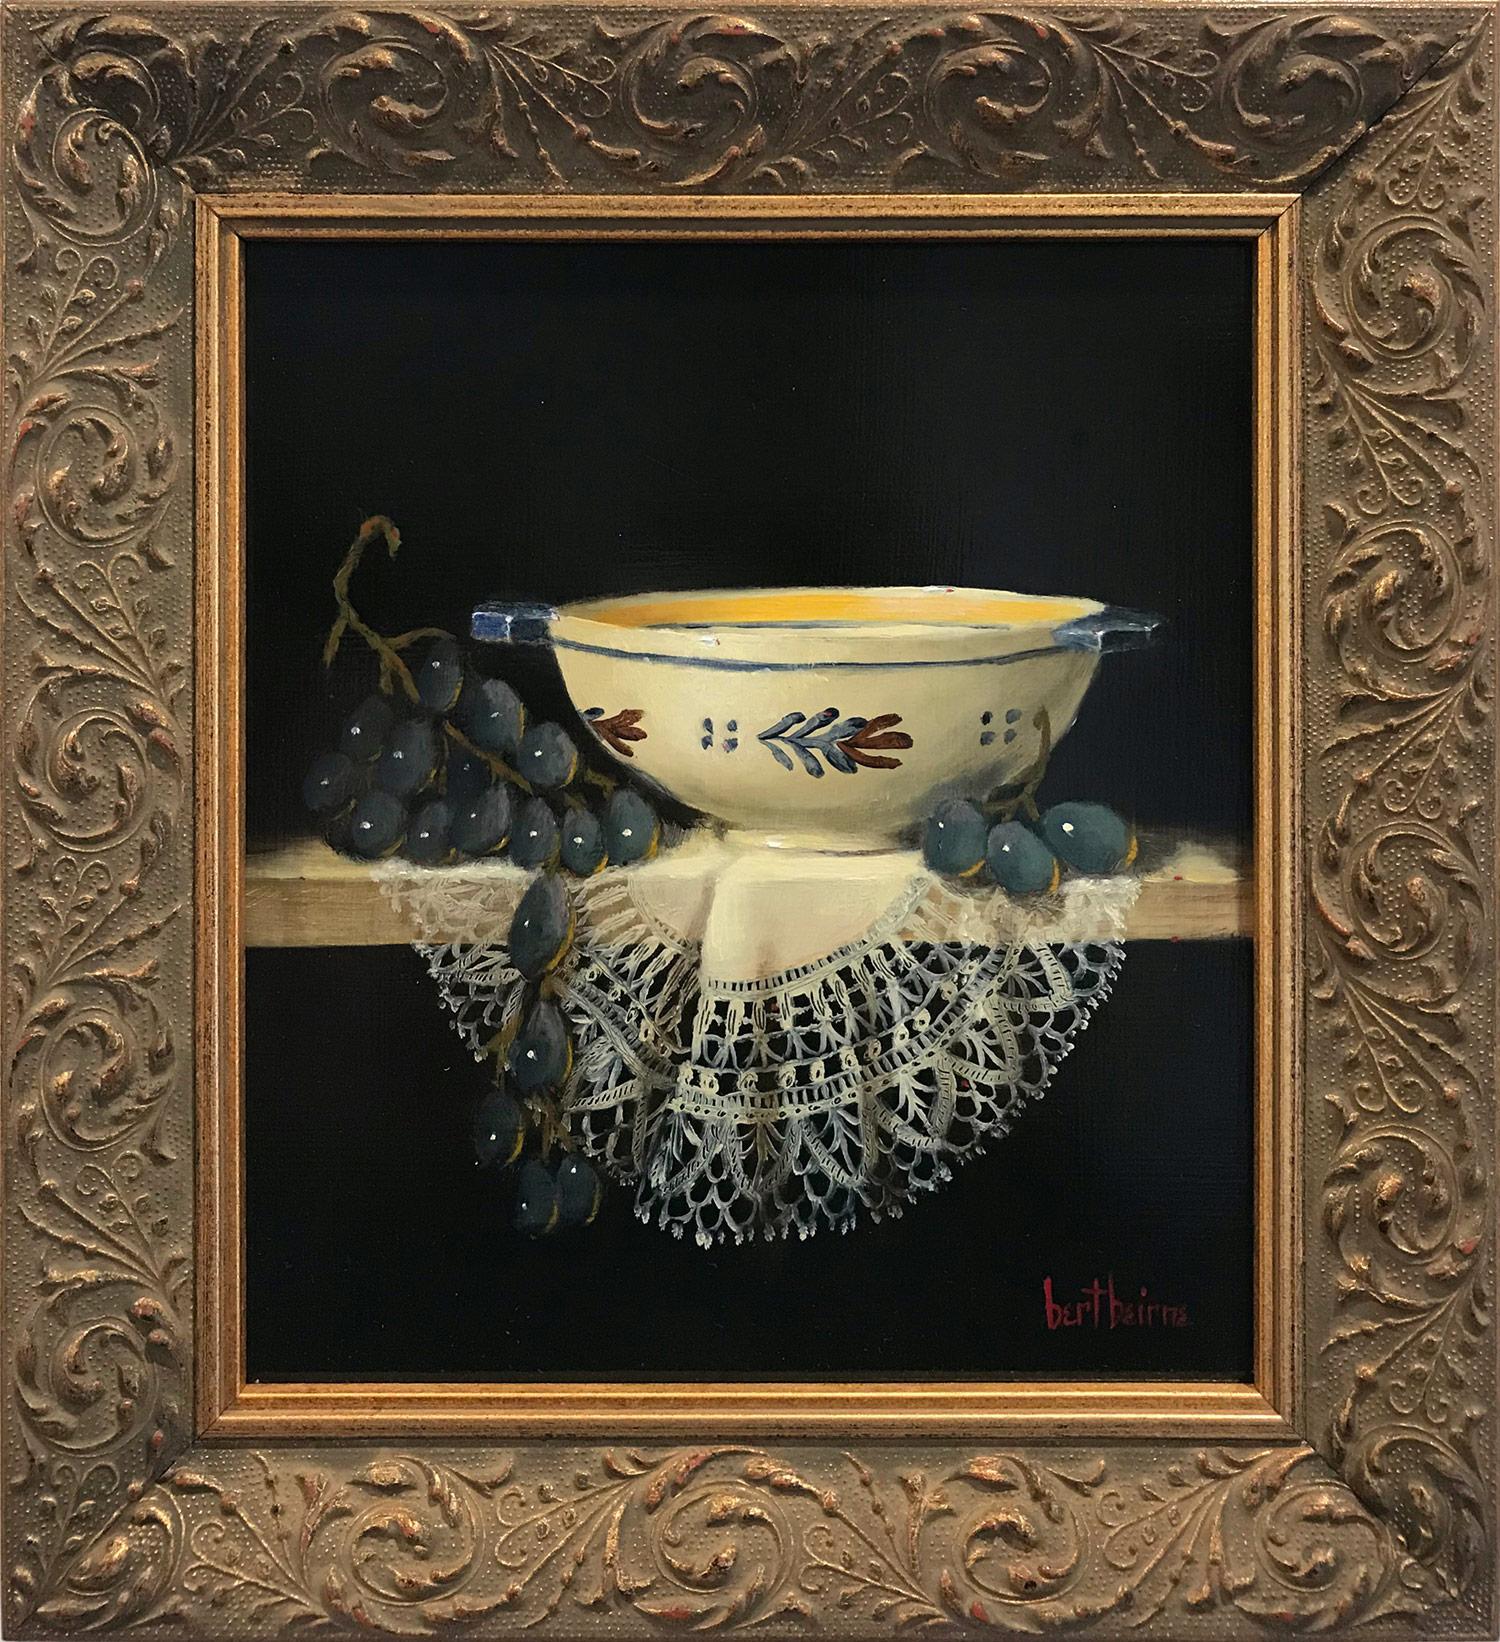 "Quimper Bowl & Black Grapes" Realist Still Life Oil Painting on Wood Panel